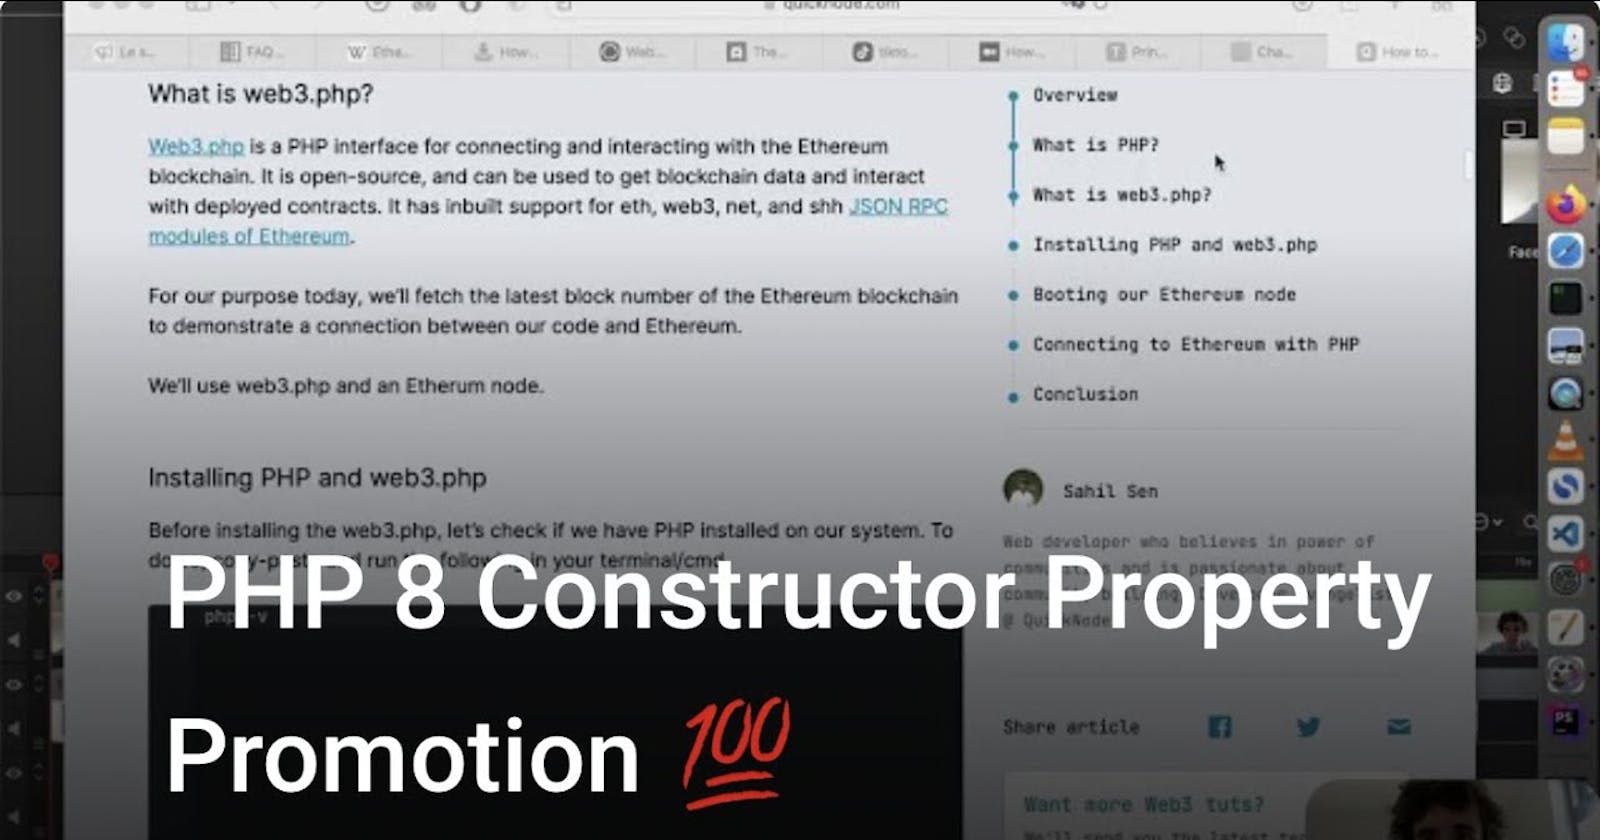 Constructor Property Promotion with PHP 8